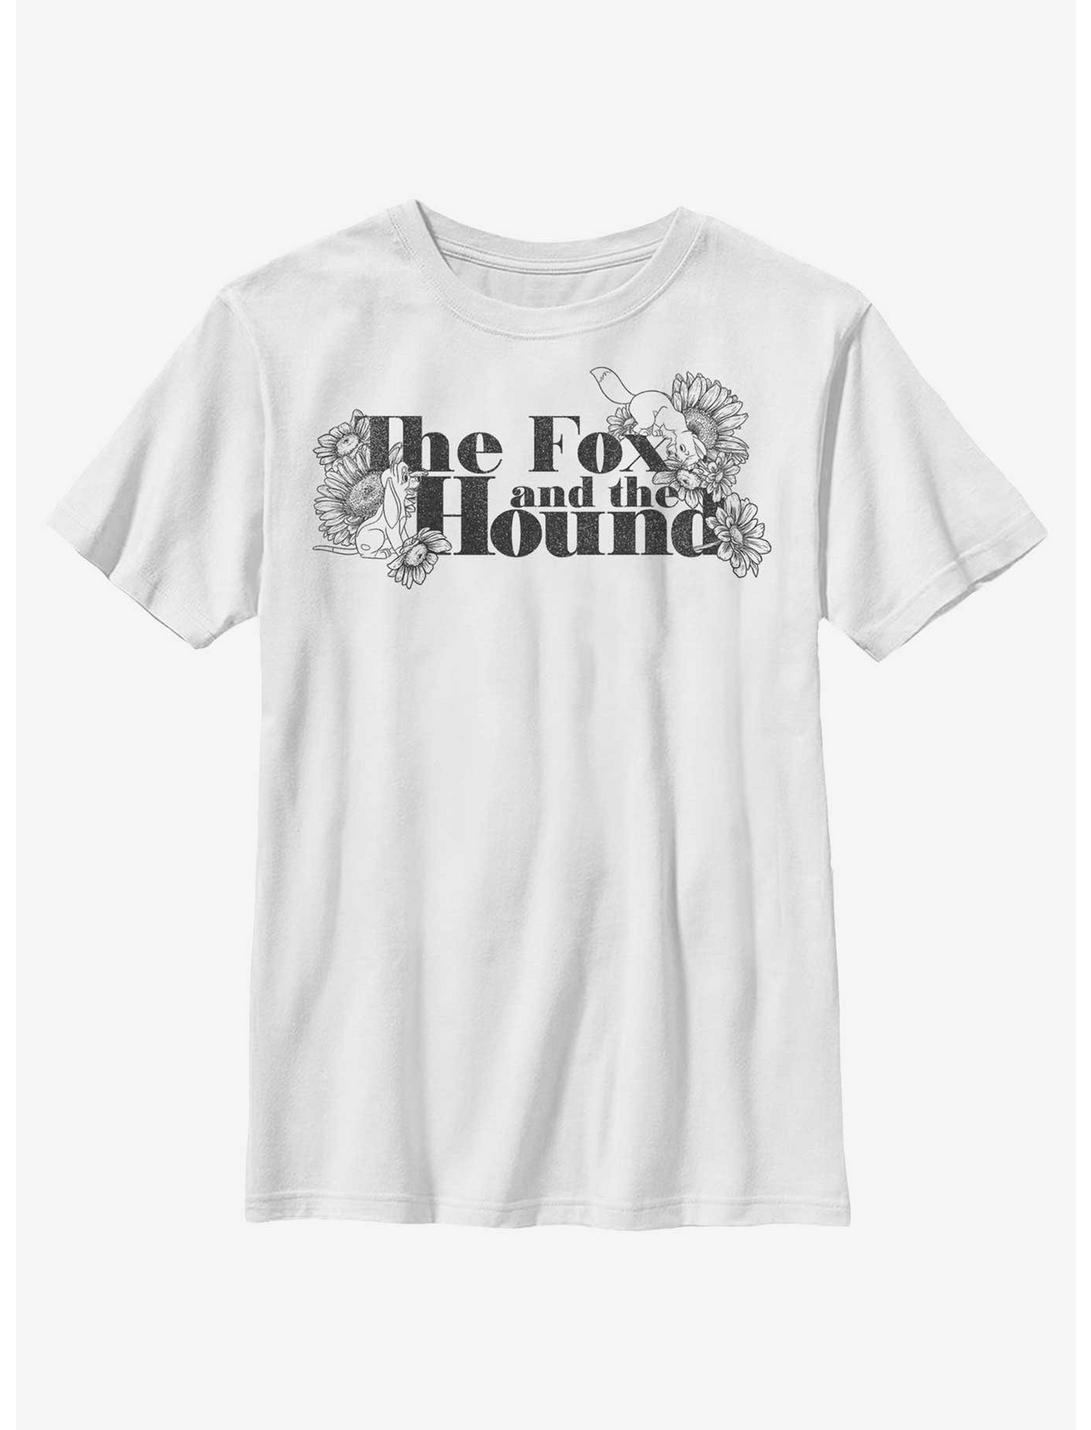 Disney The Fox and the Hound Floral Logo Youth T-Shirt, WHITE, hi-res